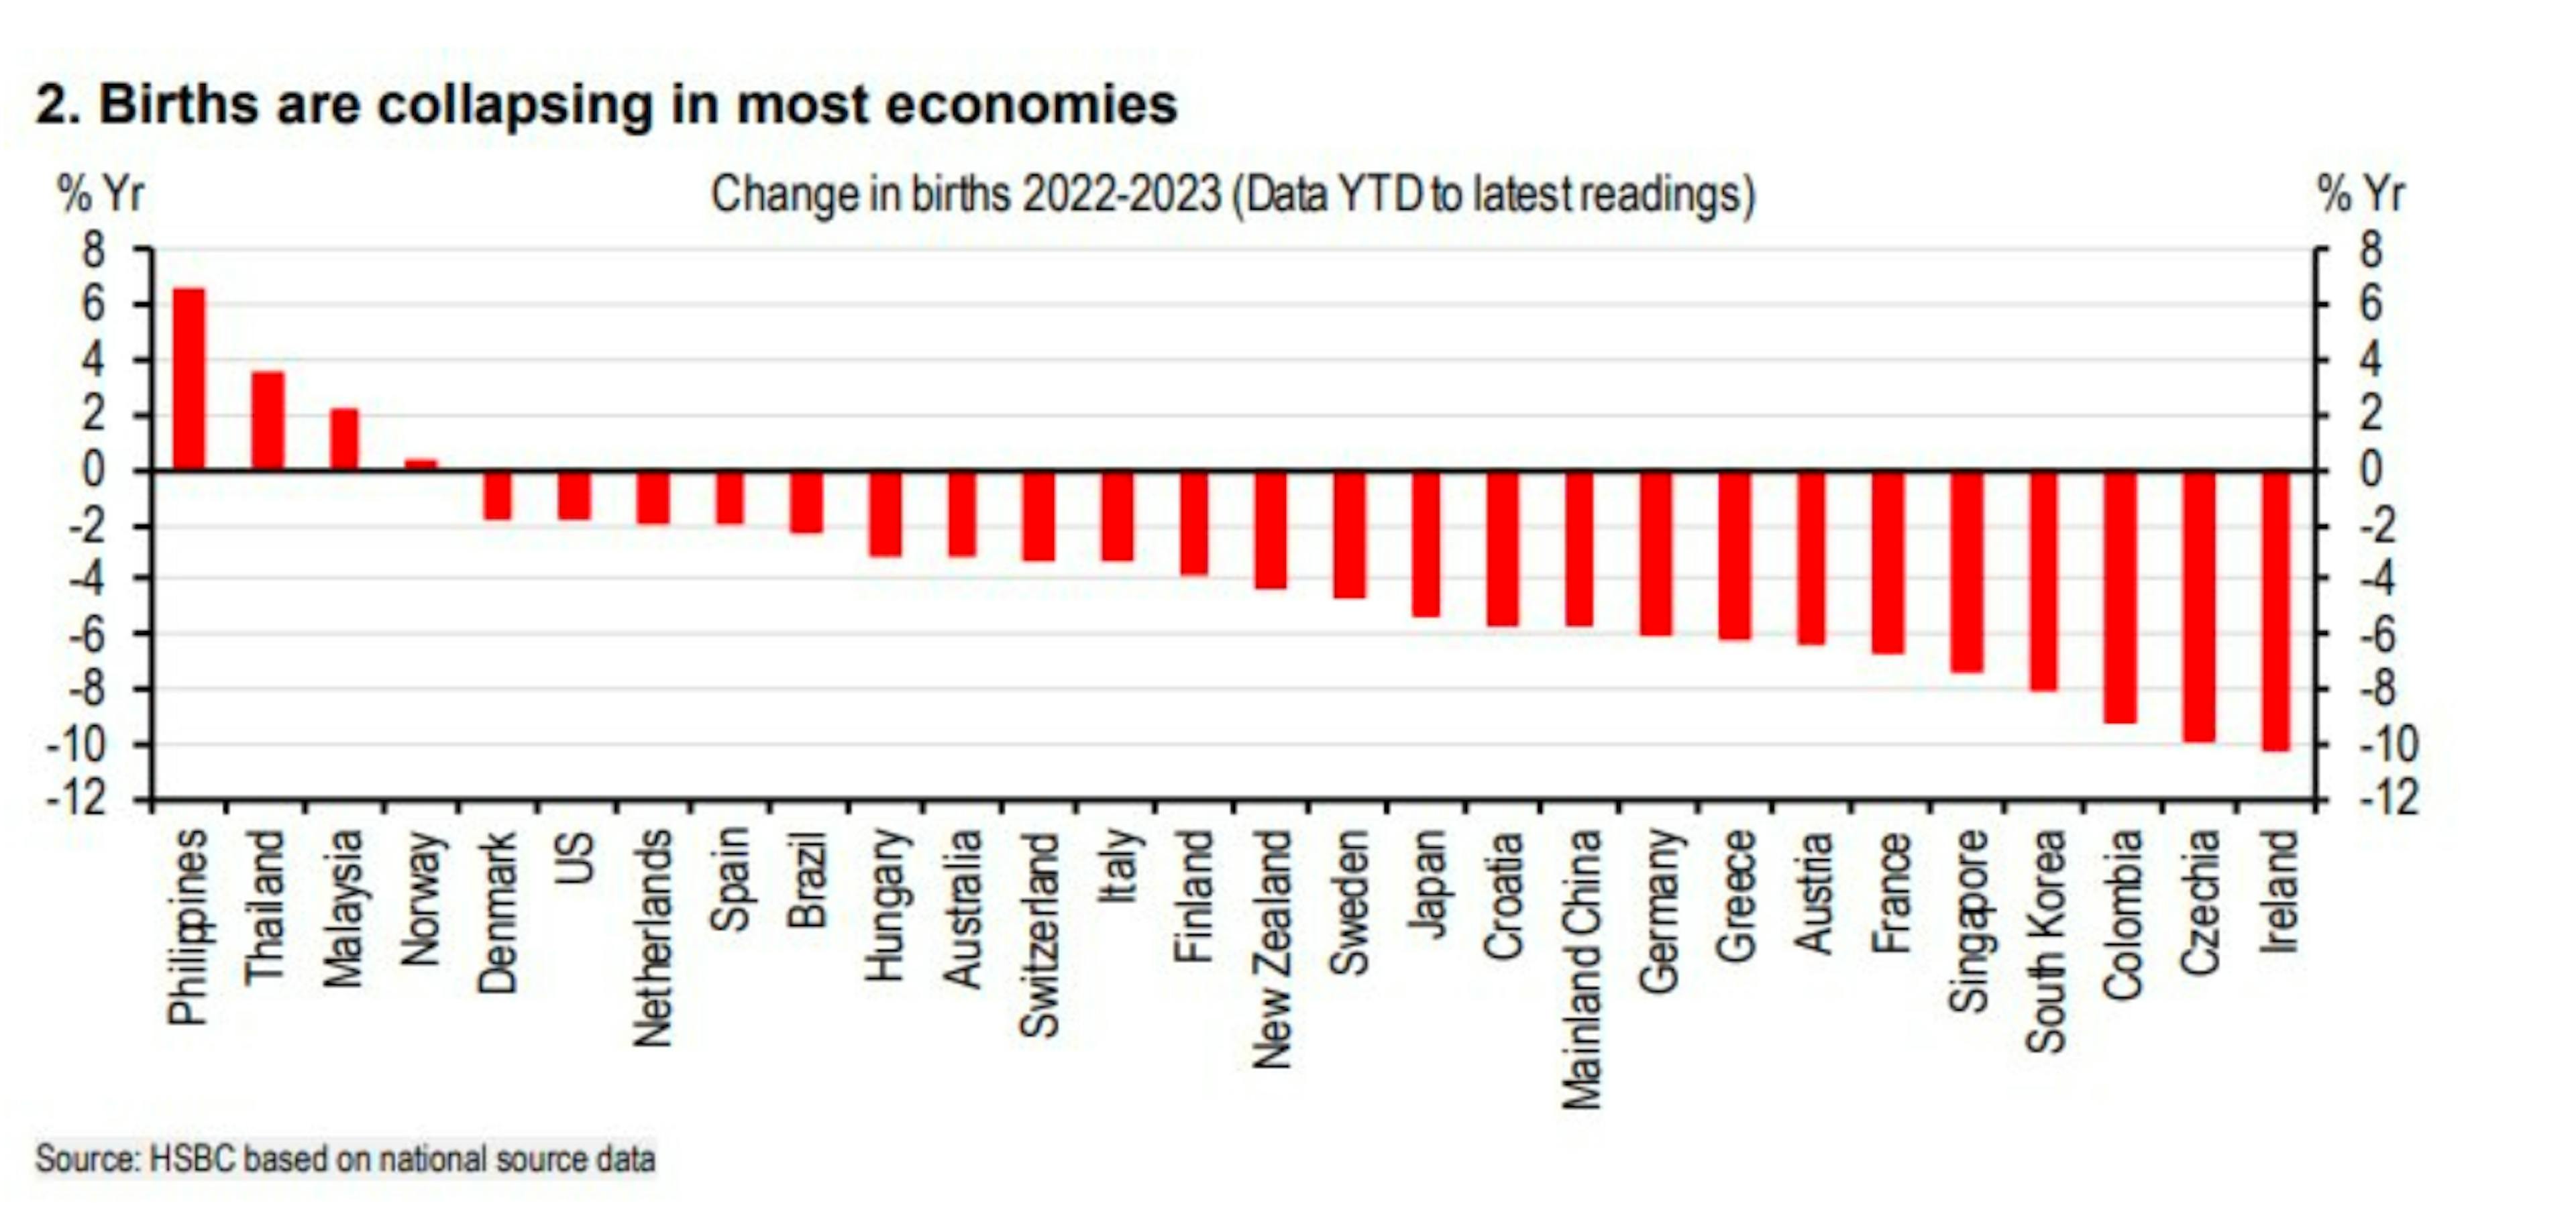 Births are collapsing in most economies